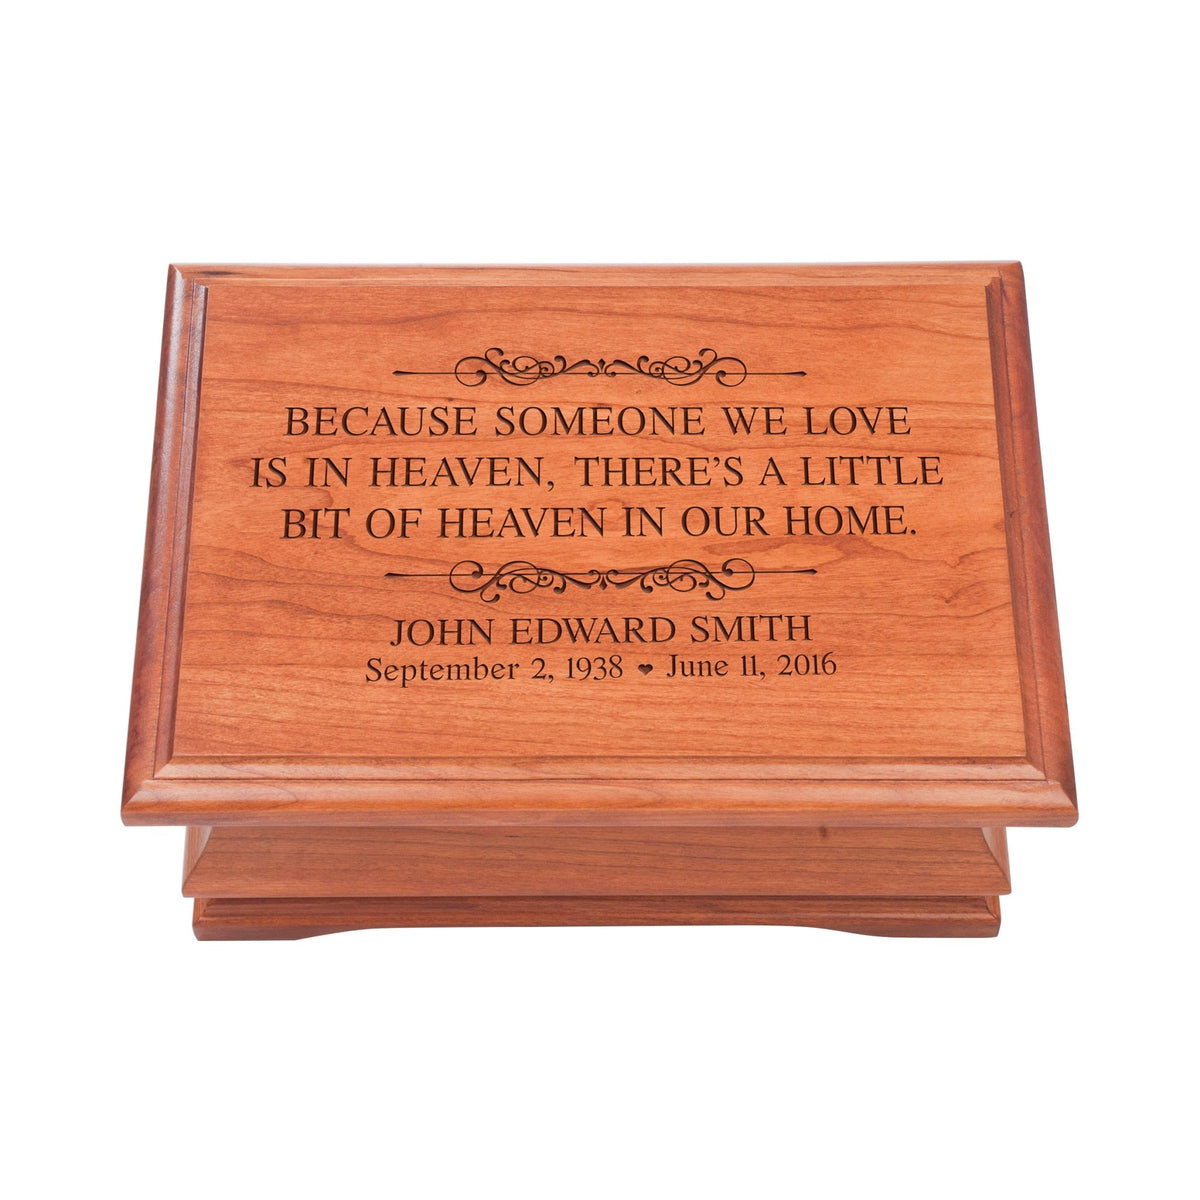 Personalized Wooden Memorial Jewelry Box Organizer 11.5x8.25 – Because Someone We Love - LifeSong Milestones